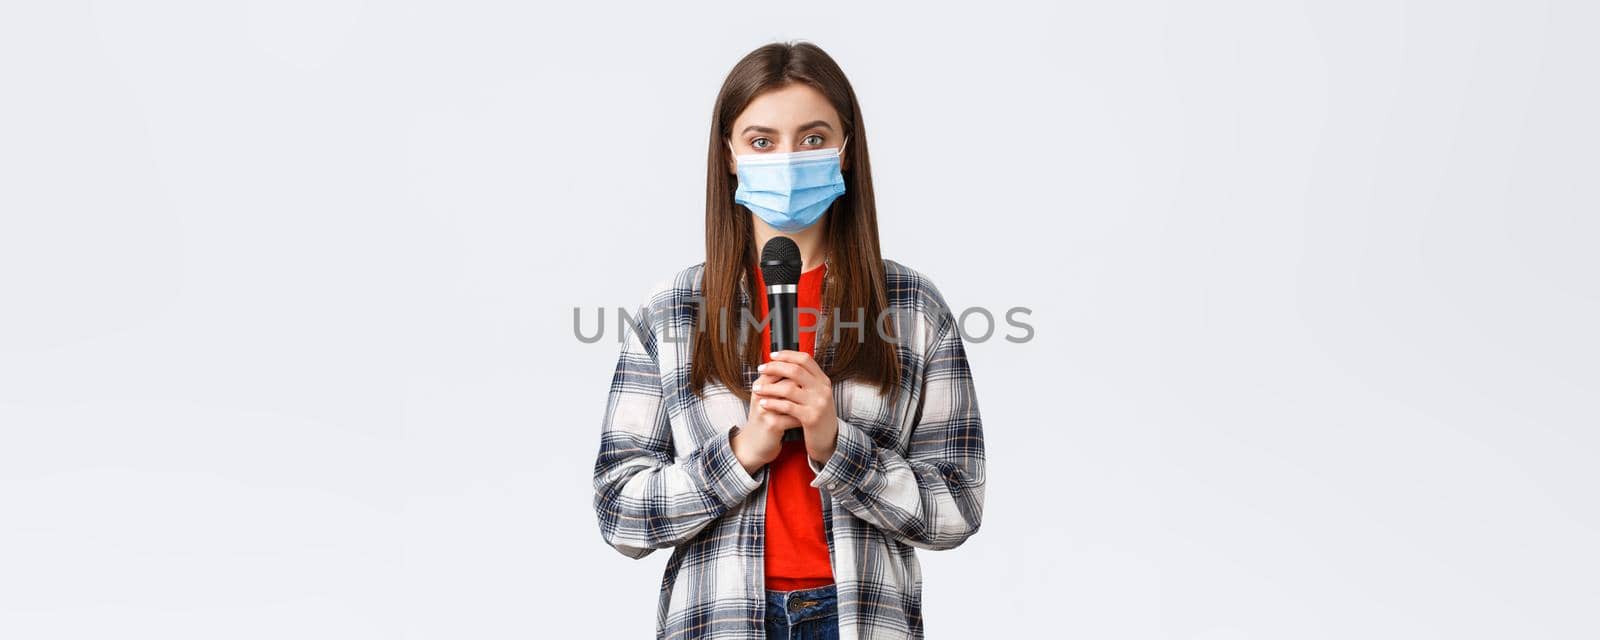 Coronavirus outbreak, leisure on quarantine, social distancing and emotions concept. Girl in medical mask performing song or stand-up, holding microphone want be heard, white background.